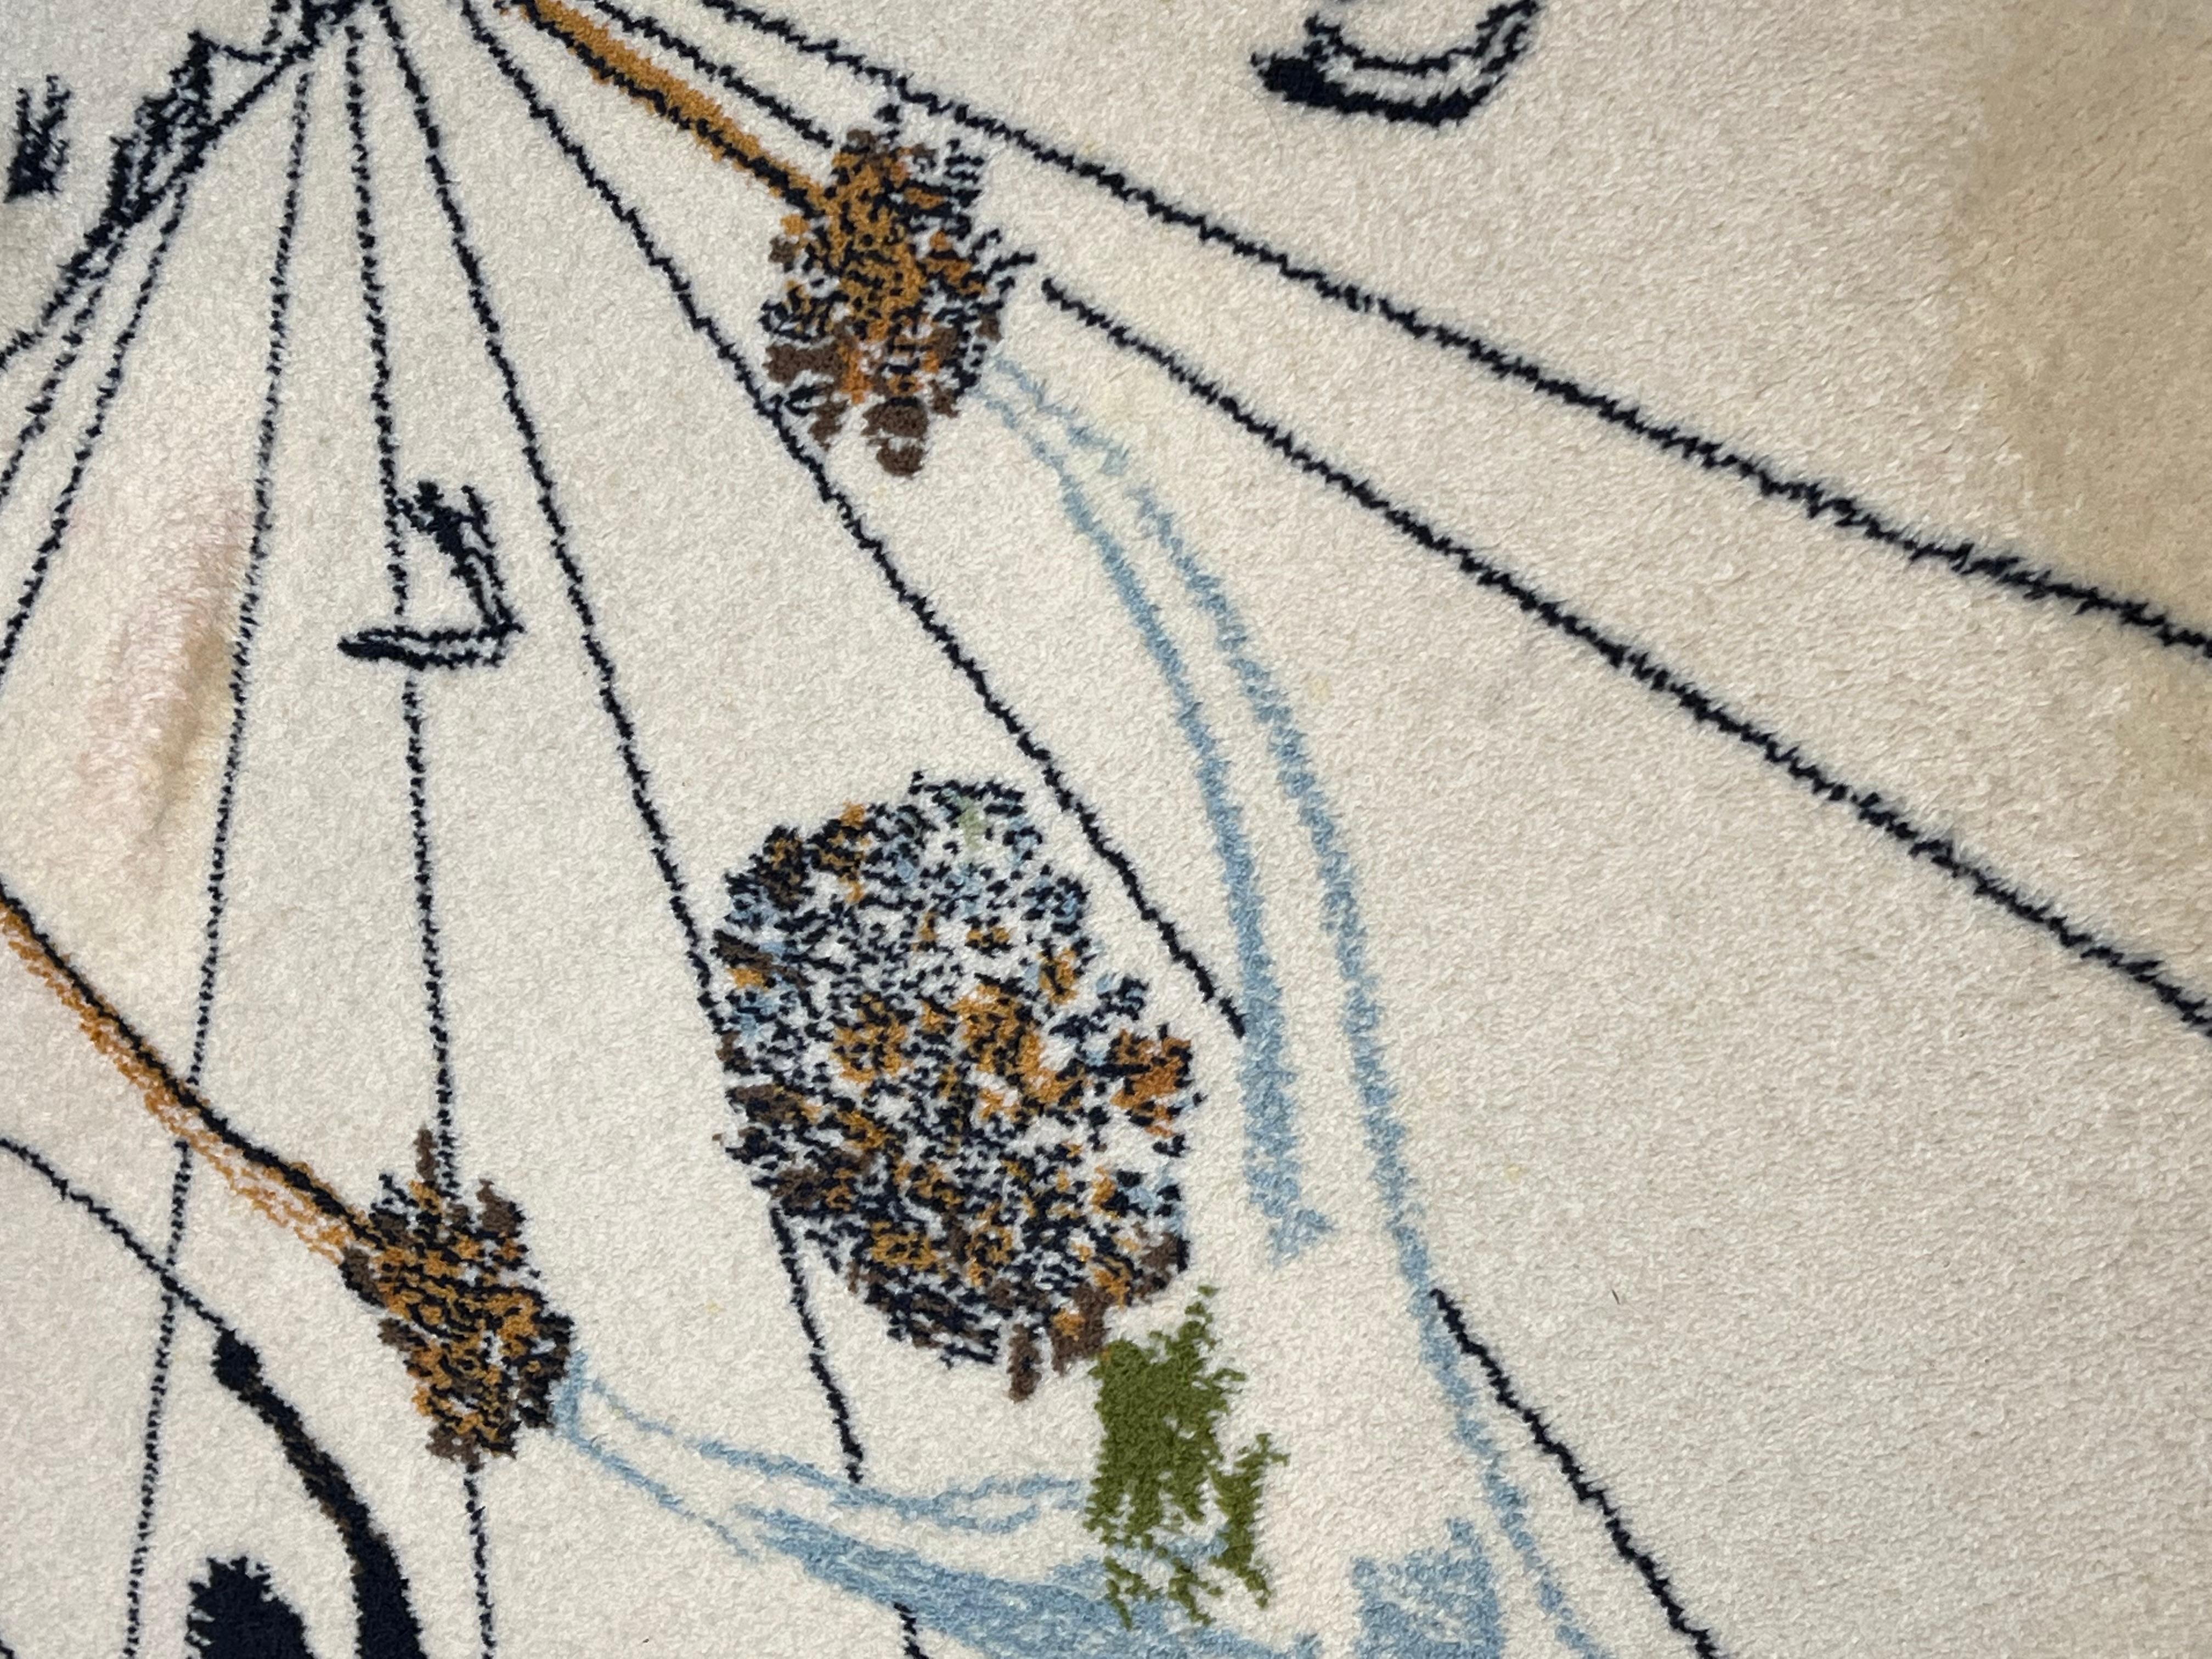 20th Century White and Blue Alice in Wonderland Salvador Dalí Rug, ca 1977 For Sale 1